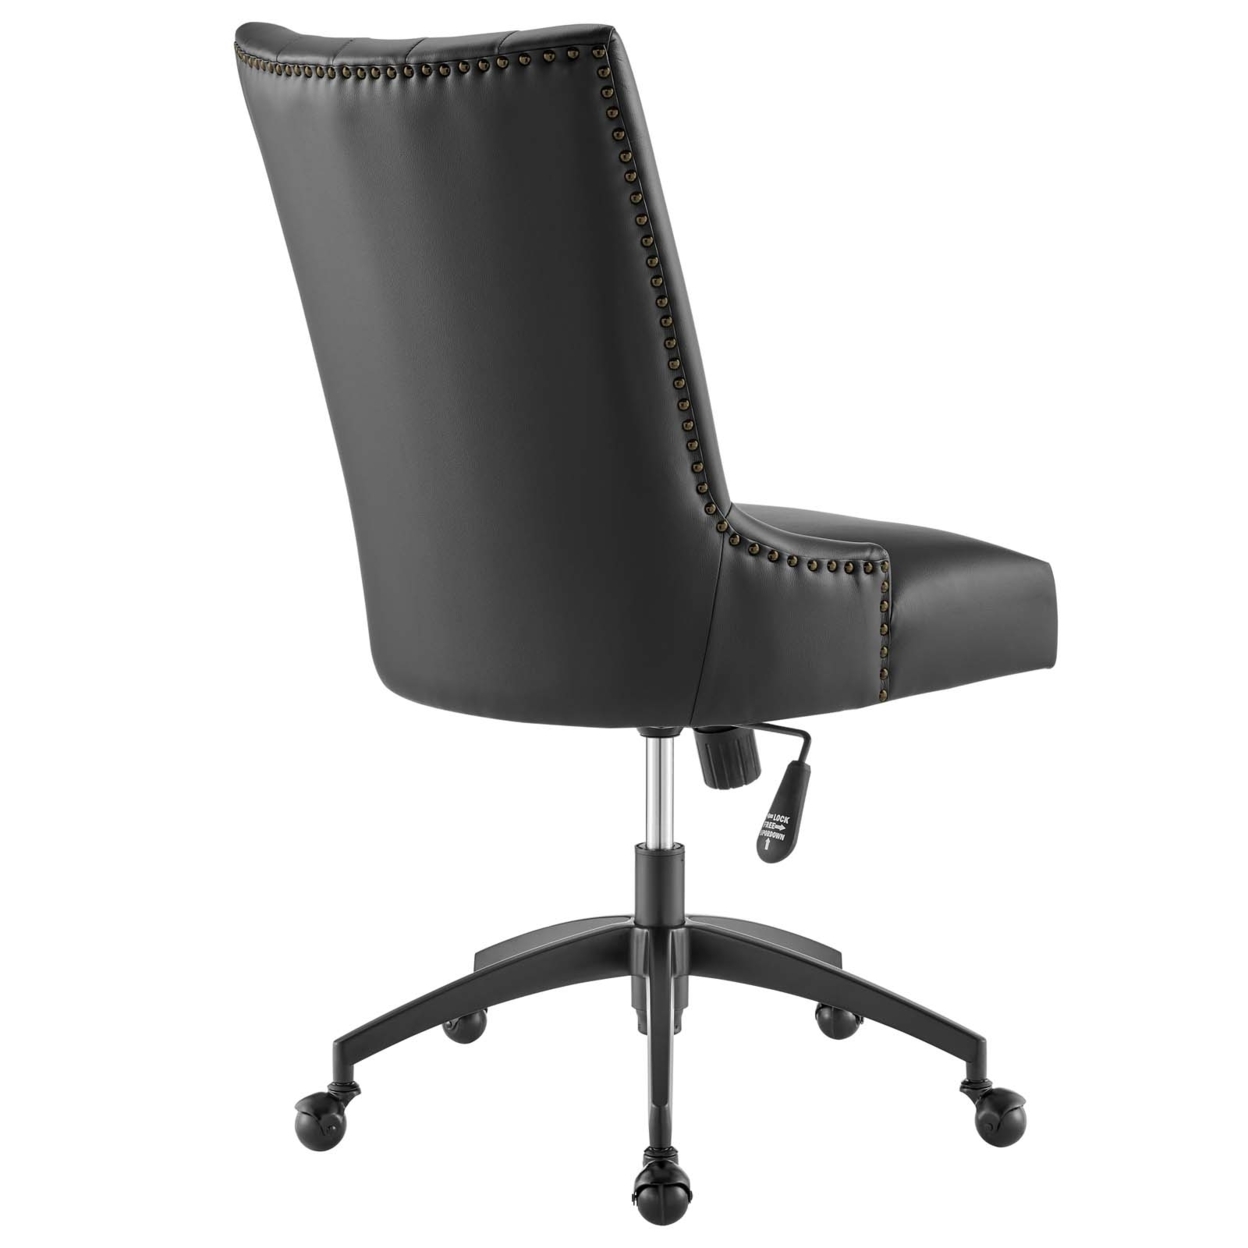 Empower Channel Tufted Vegan Leather Office Chair, Black Black